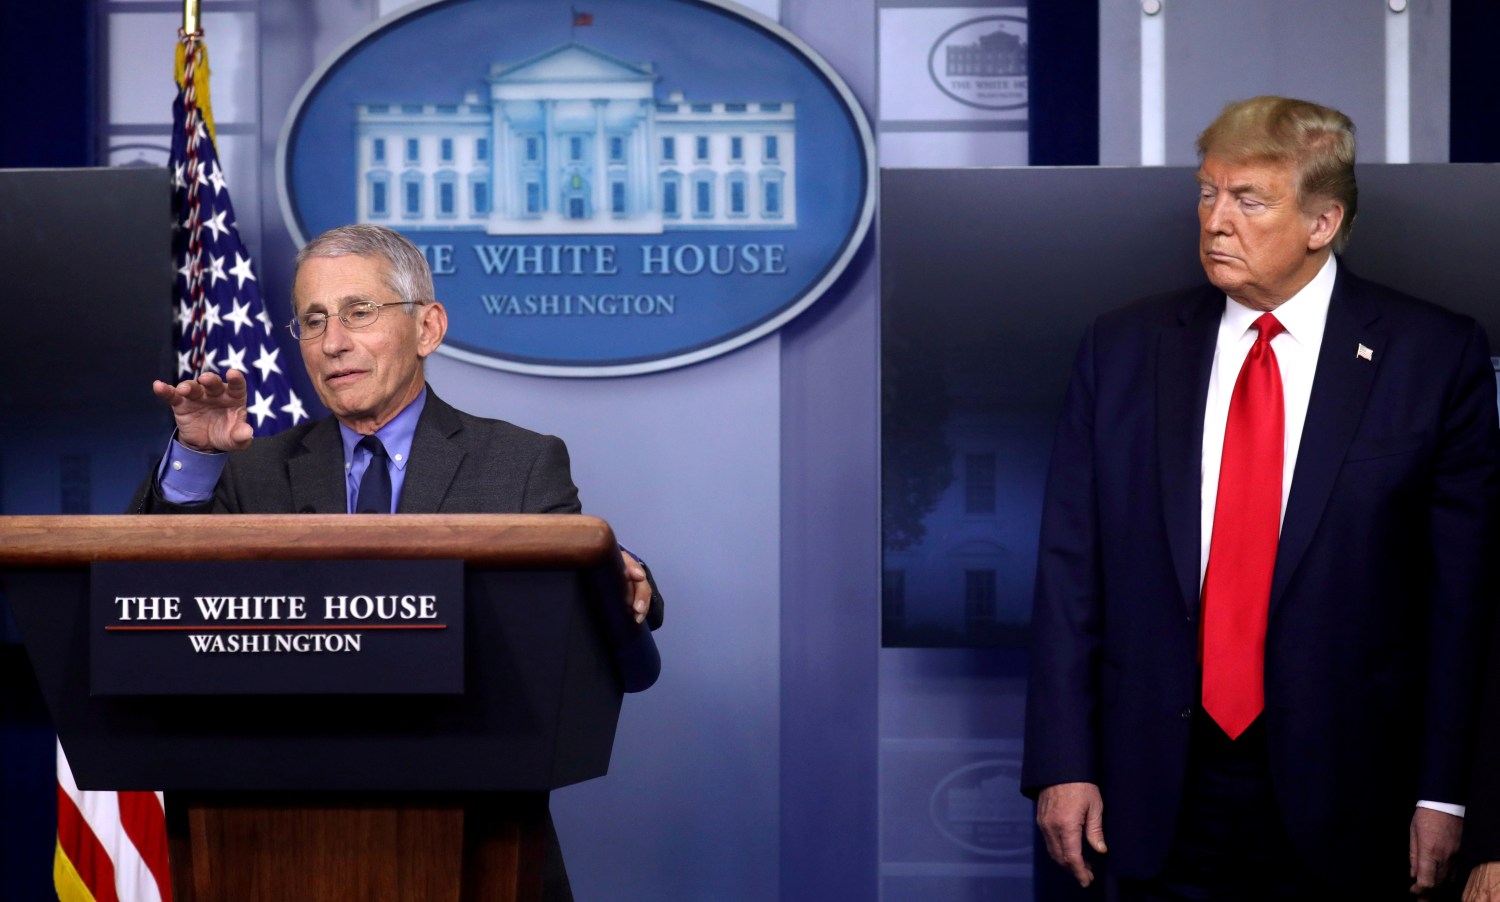 FILE PHOTO: National Institute of Allergy and Infectious Diseases director Dr. Anthony Fauci speaks as U.S. President Donald Trump listens during the daily coronavirus task force briefing at the White House in Washington, U.S., April 13, 2020. REUTERS/Leah Millis/File Photo